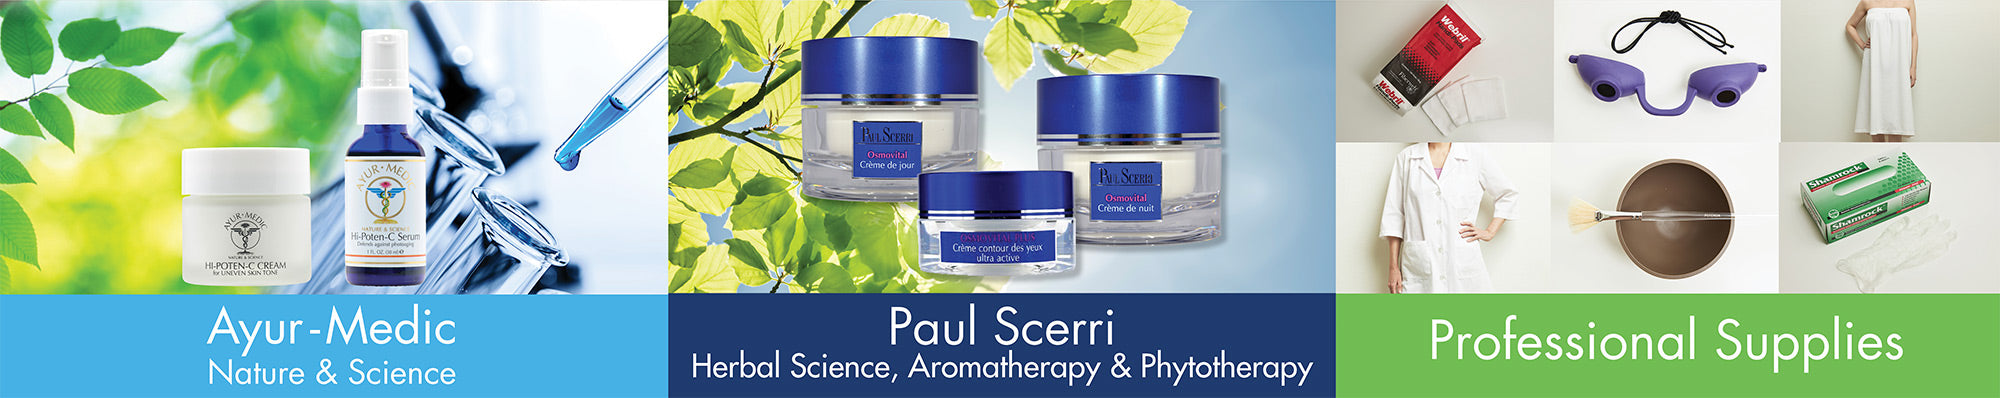 Aesthetics International products for skin care professionals